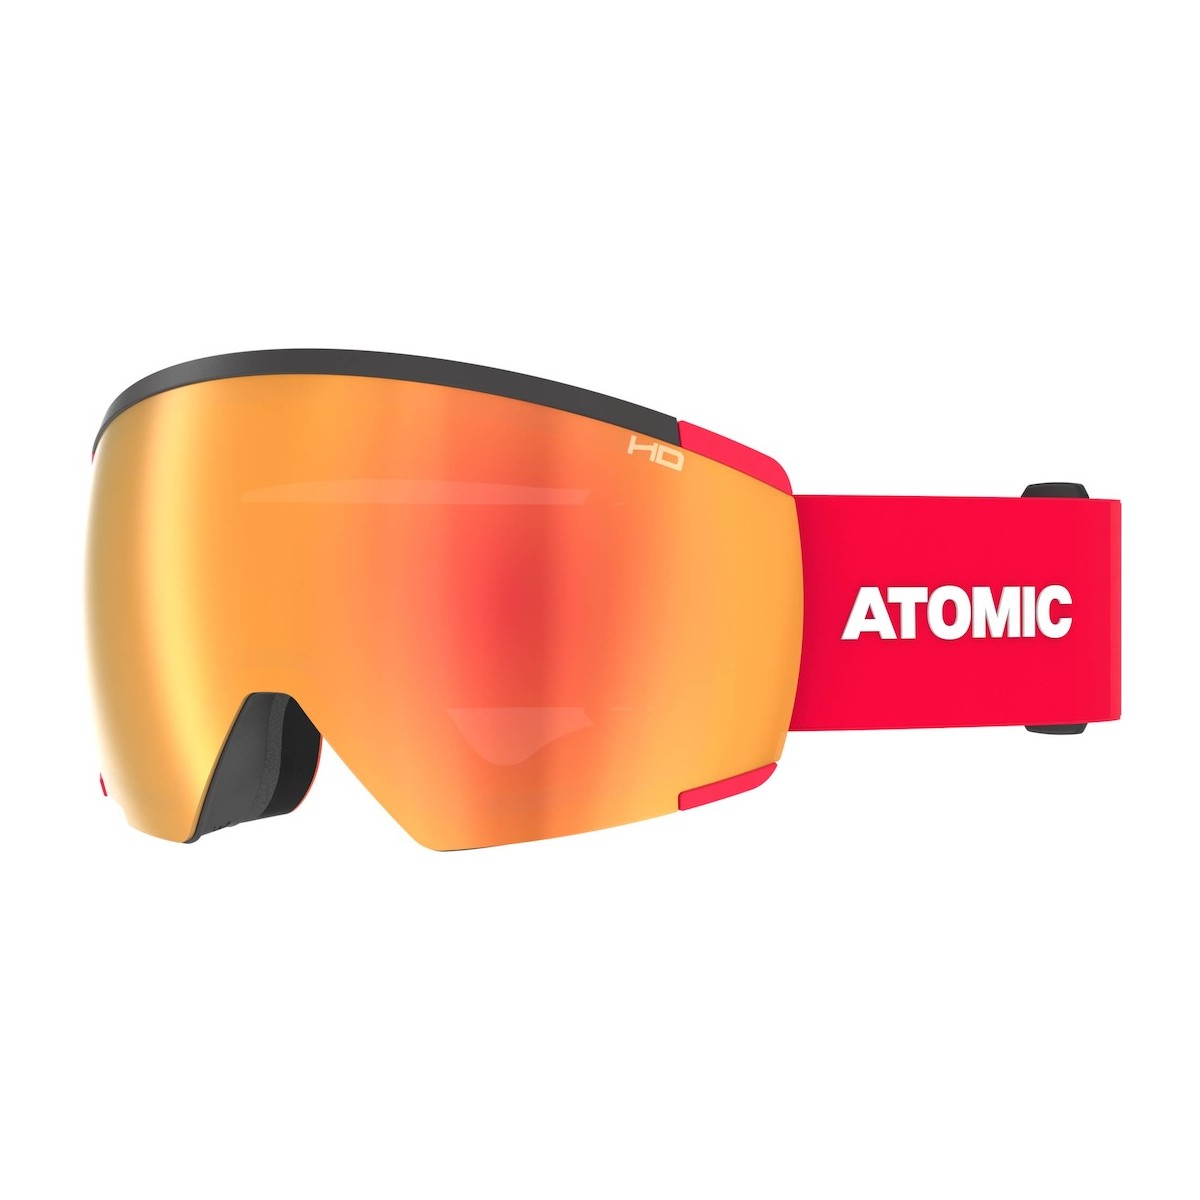 ATOMIC REDSTER WC HD W/RED HD C2-3 /XLENS YELLOW/BLUE HD C1-2/BLUE HD C1-2/CLEAR goggles - red